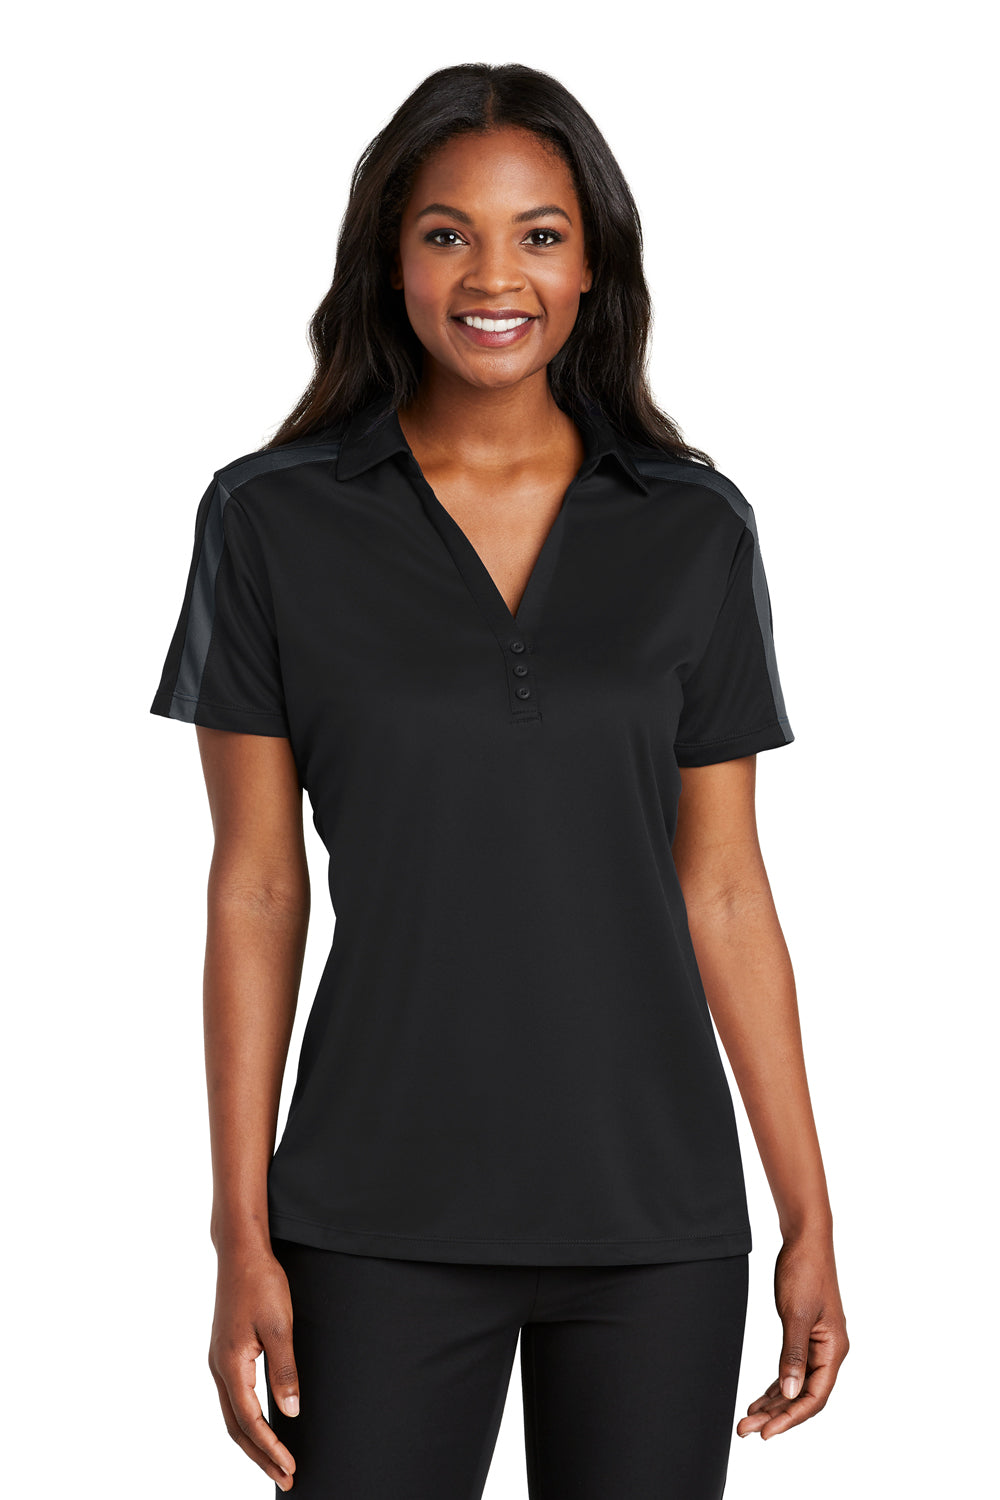 Port Authority L547 Womens Silk Touch Performance Moisture Wicking Short Sleeve Polo Shirt Black/Grey Front